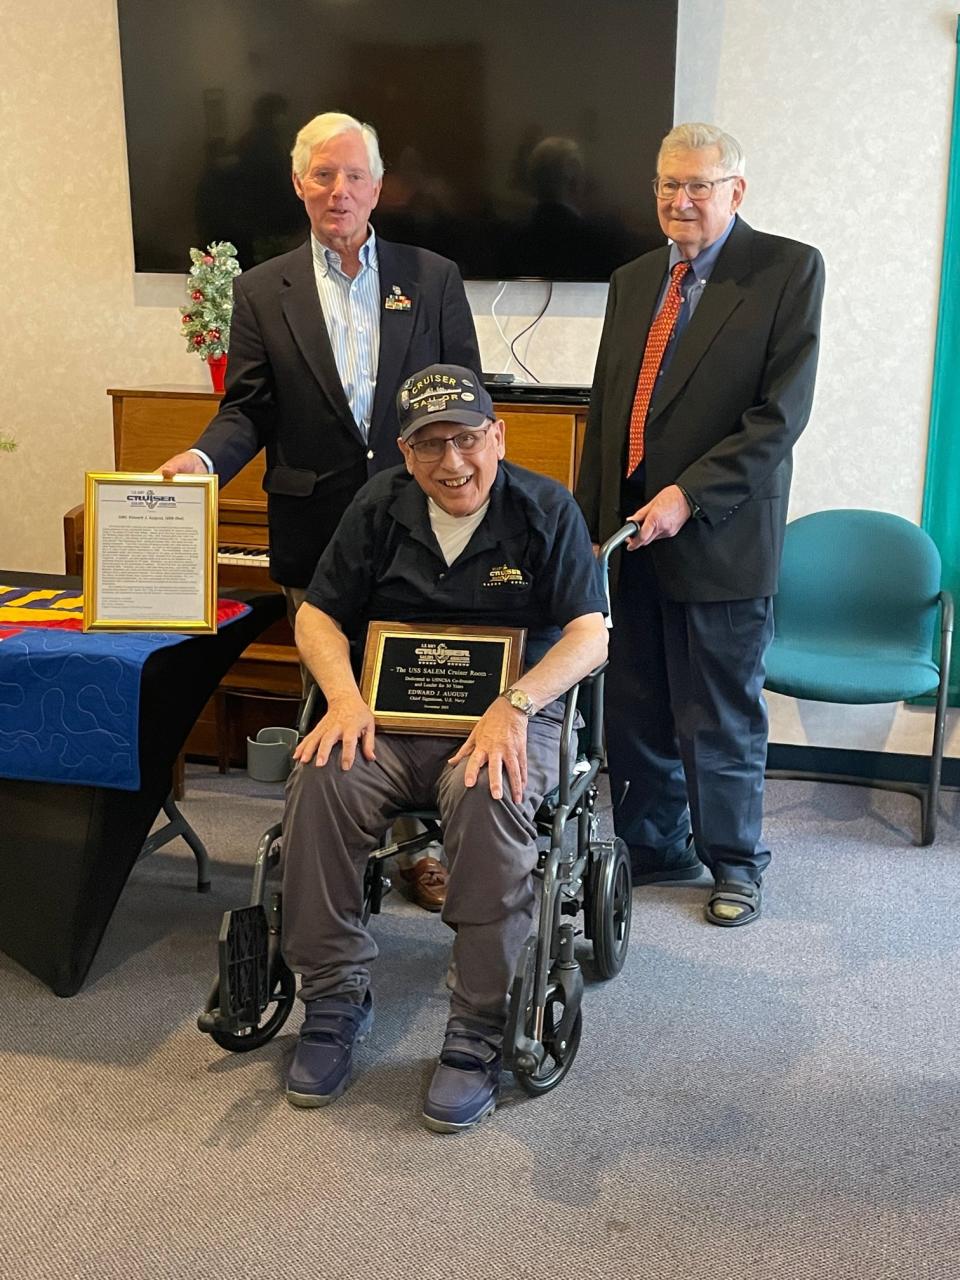 Retired U.S. Navy Chief Petty Officer Ed August Sr. accepts a citation and plaque commemorating the naming of two “cruiser compartments” aboard the USS Salem museum ship after him. Joining him at Linn Health & Rehabilitation on Dec. 6 are U.S. Navy Cruiser Sailors Association President David Blomstrom, right, and Secretary James Chryst.